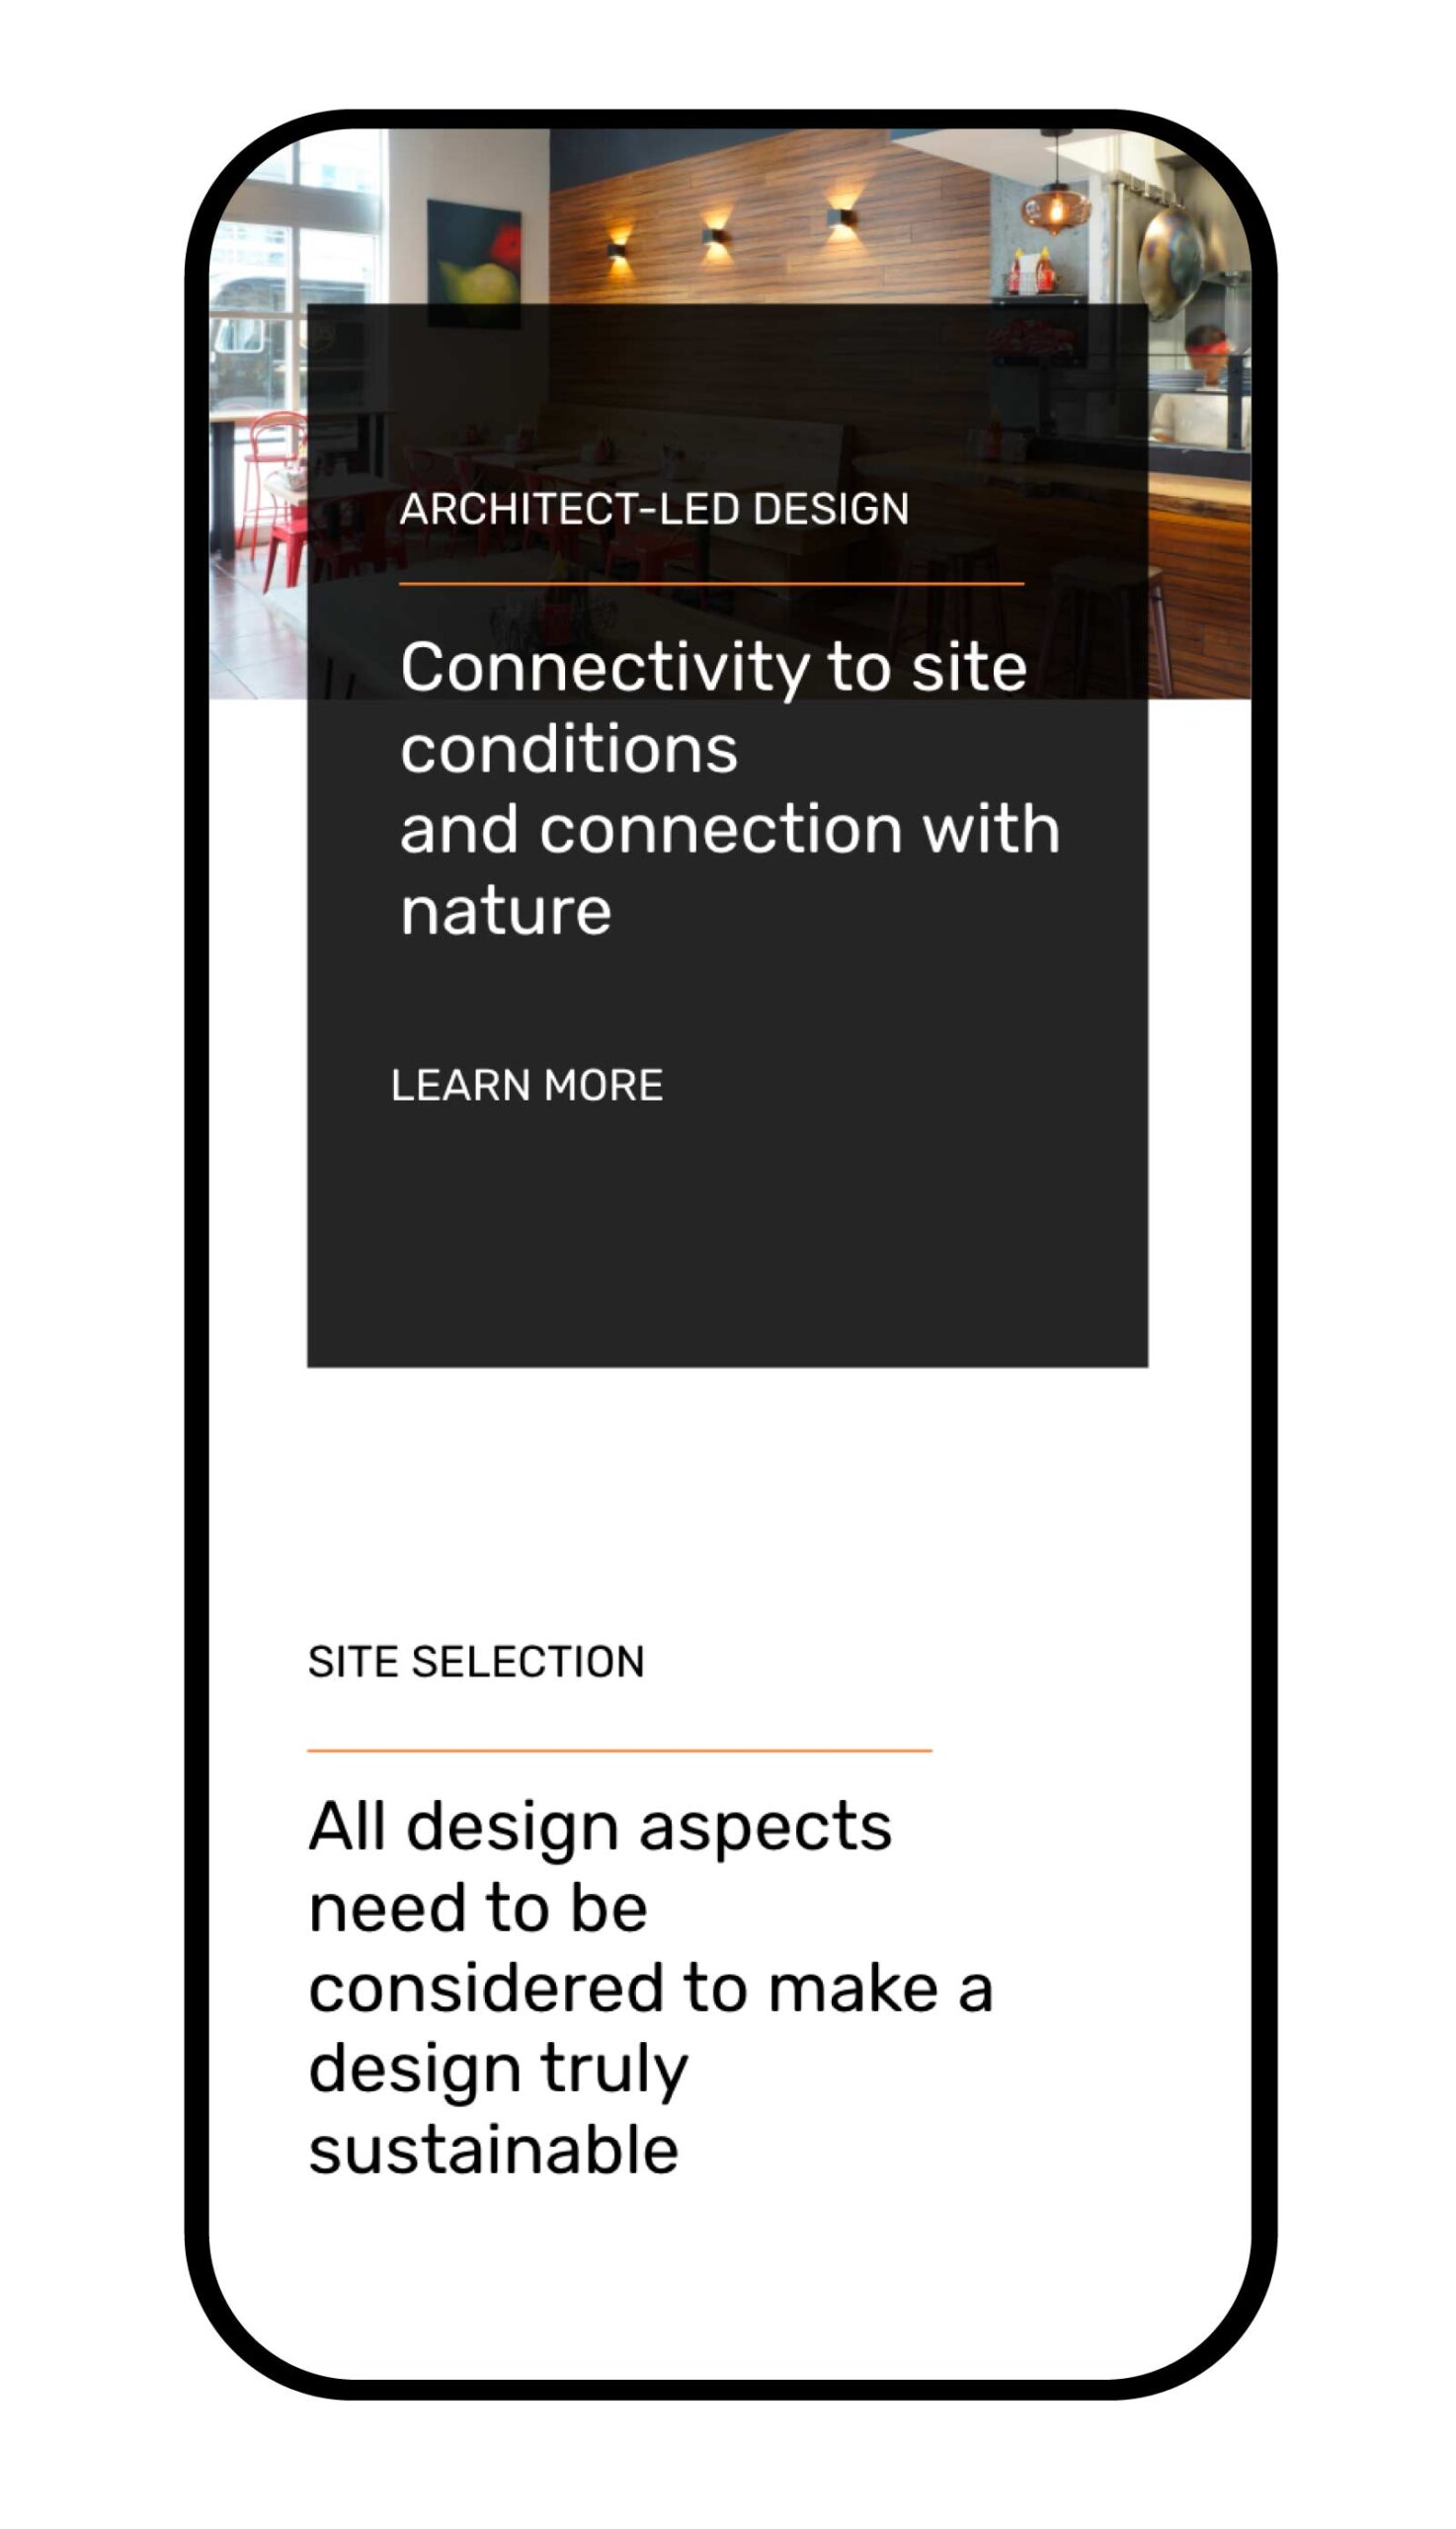 UI UX Architecture company website site selection screen.